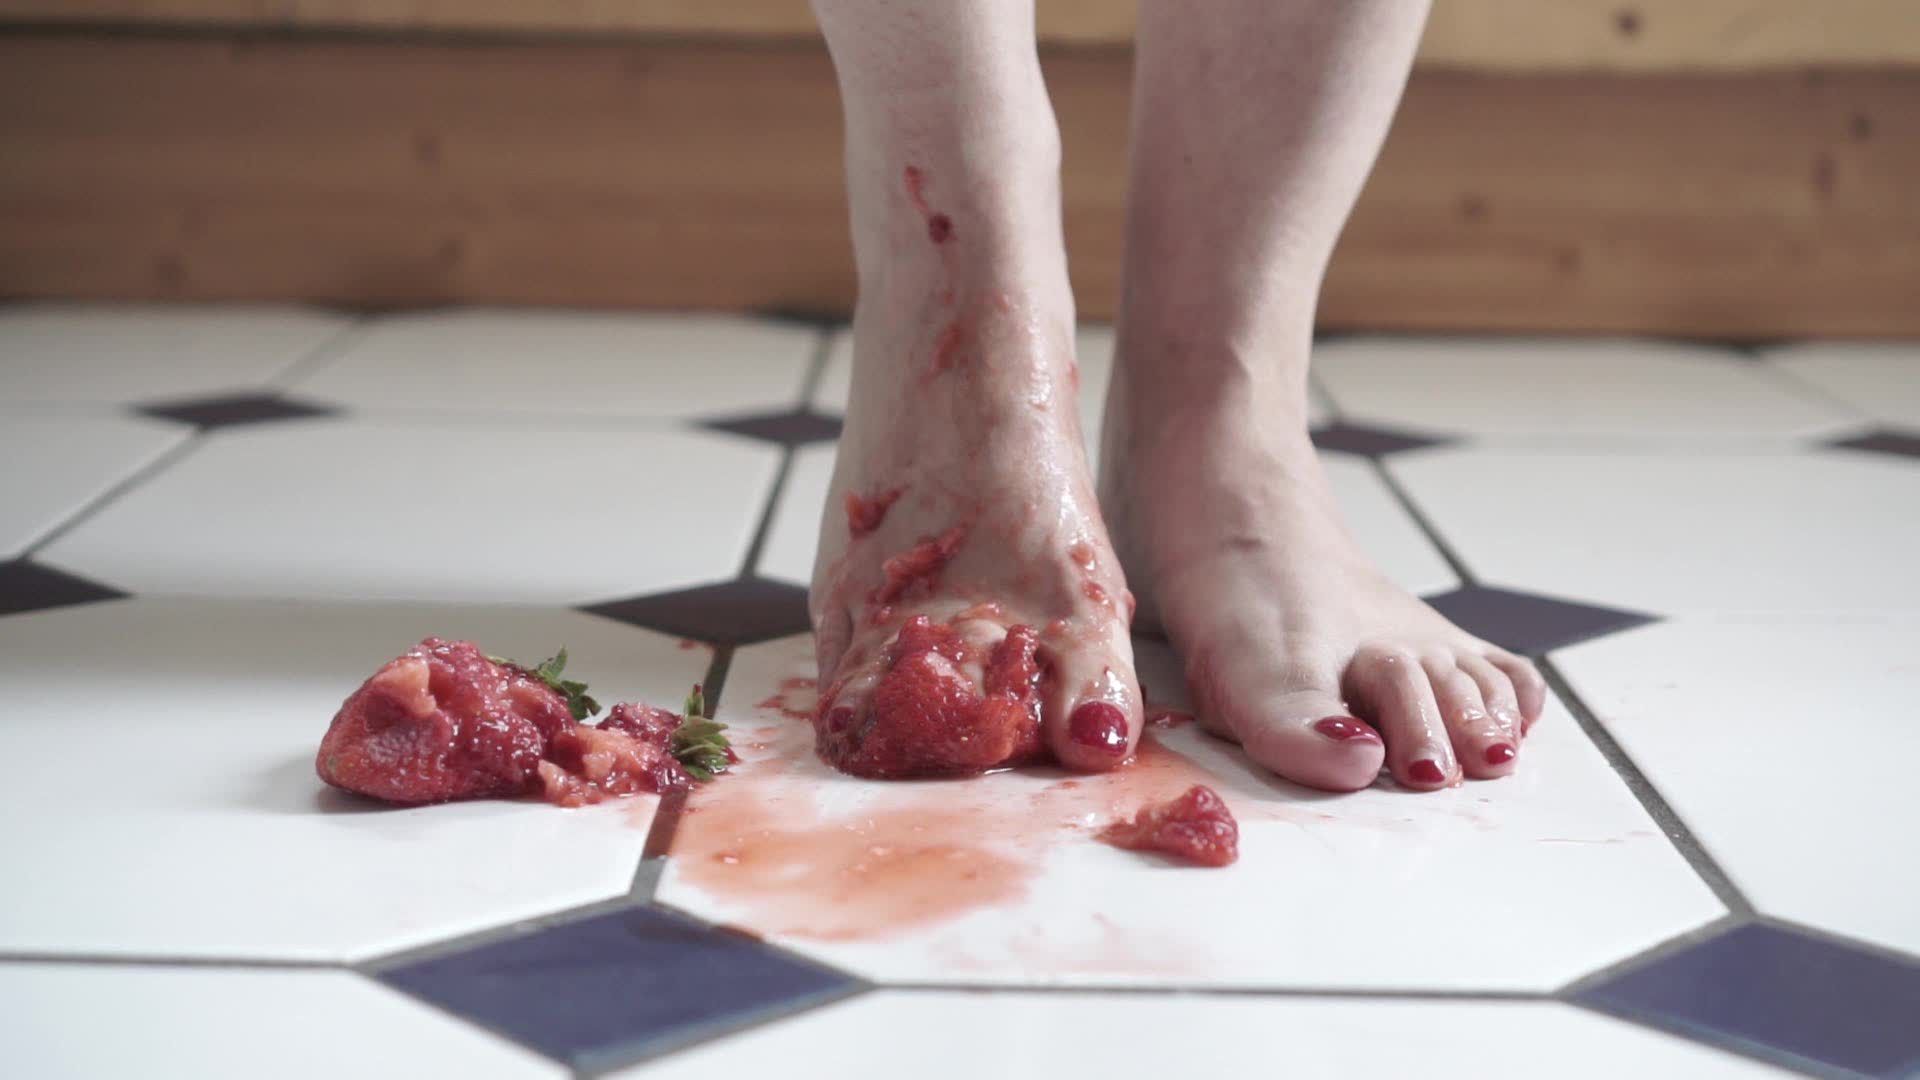 Fun with strawberries and feet